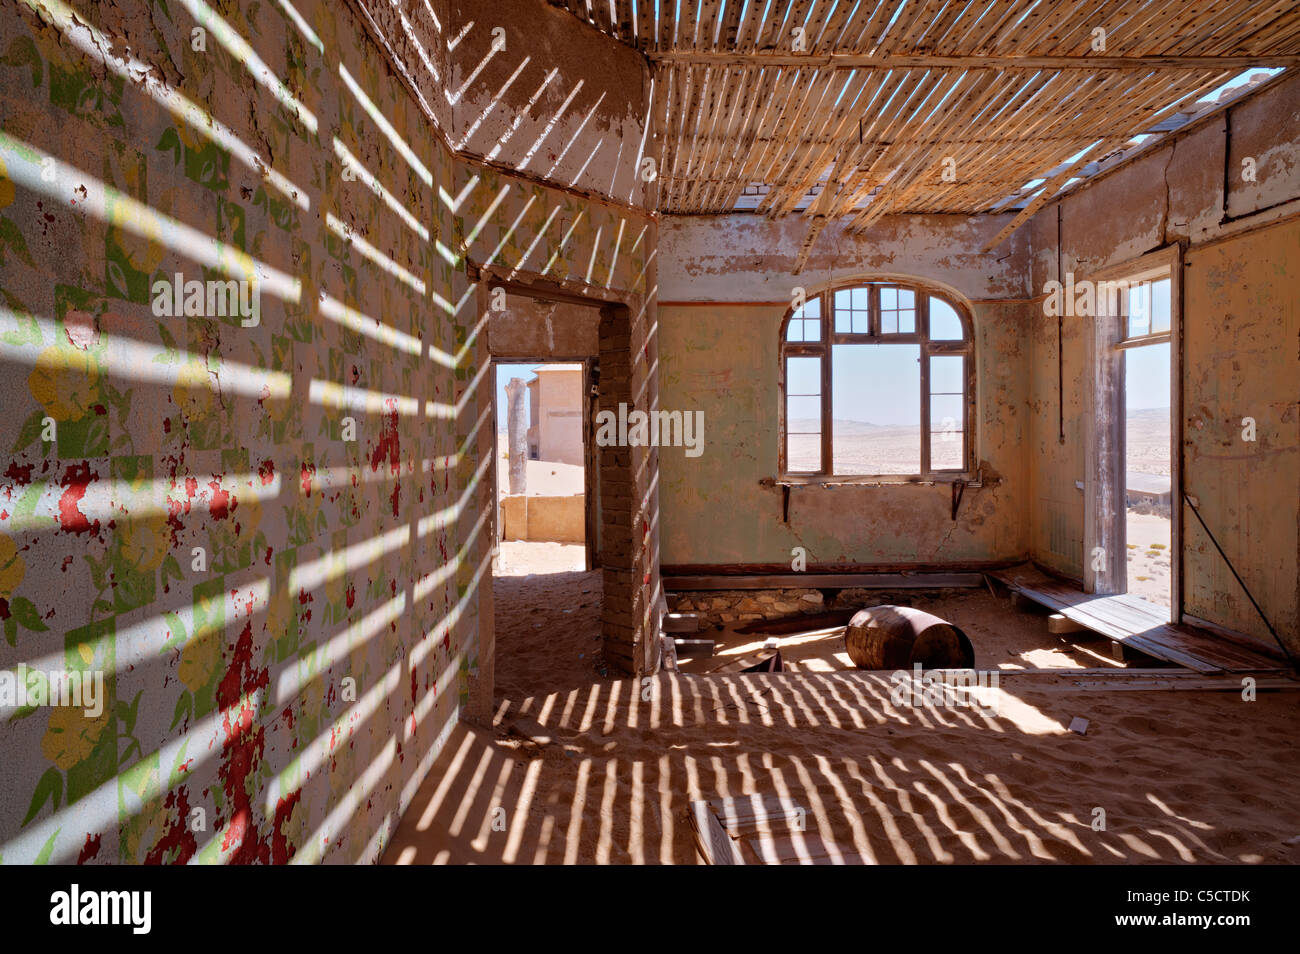 Sun shadows in building without roof, Kolmanskop Ghost Town near Luderitz, Namibia, Africa. Stock Photo